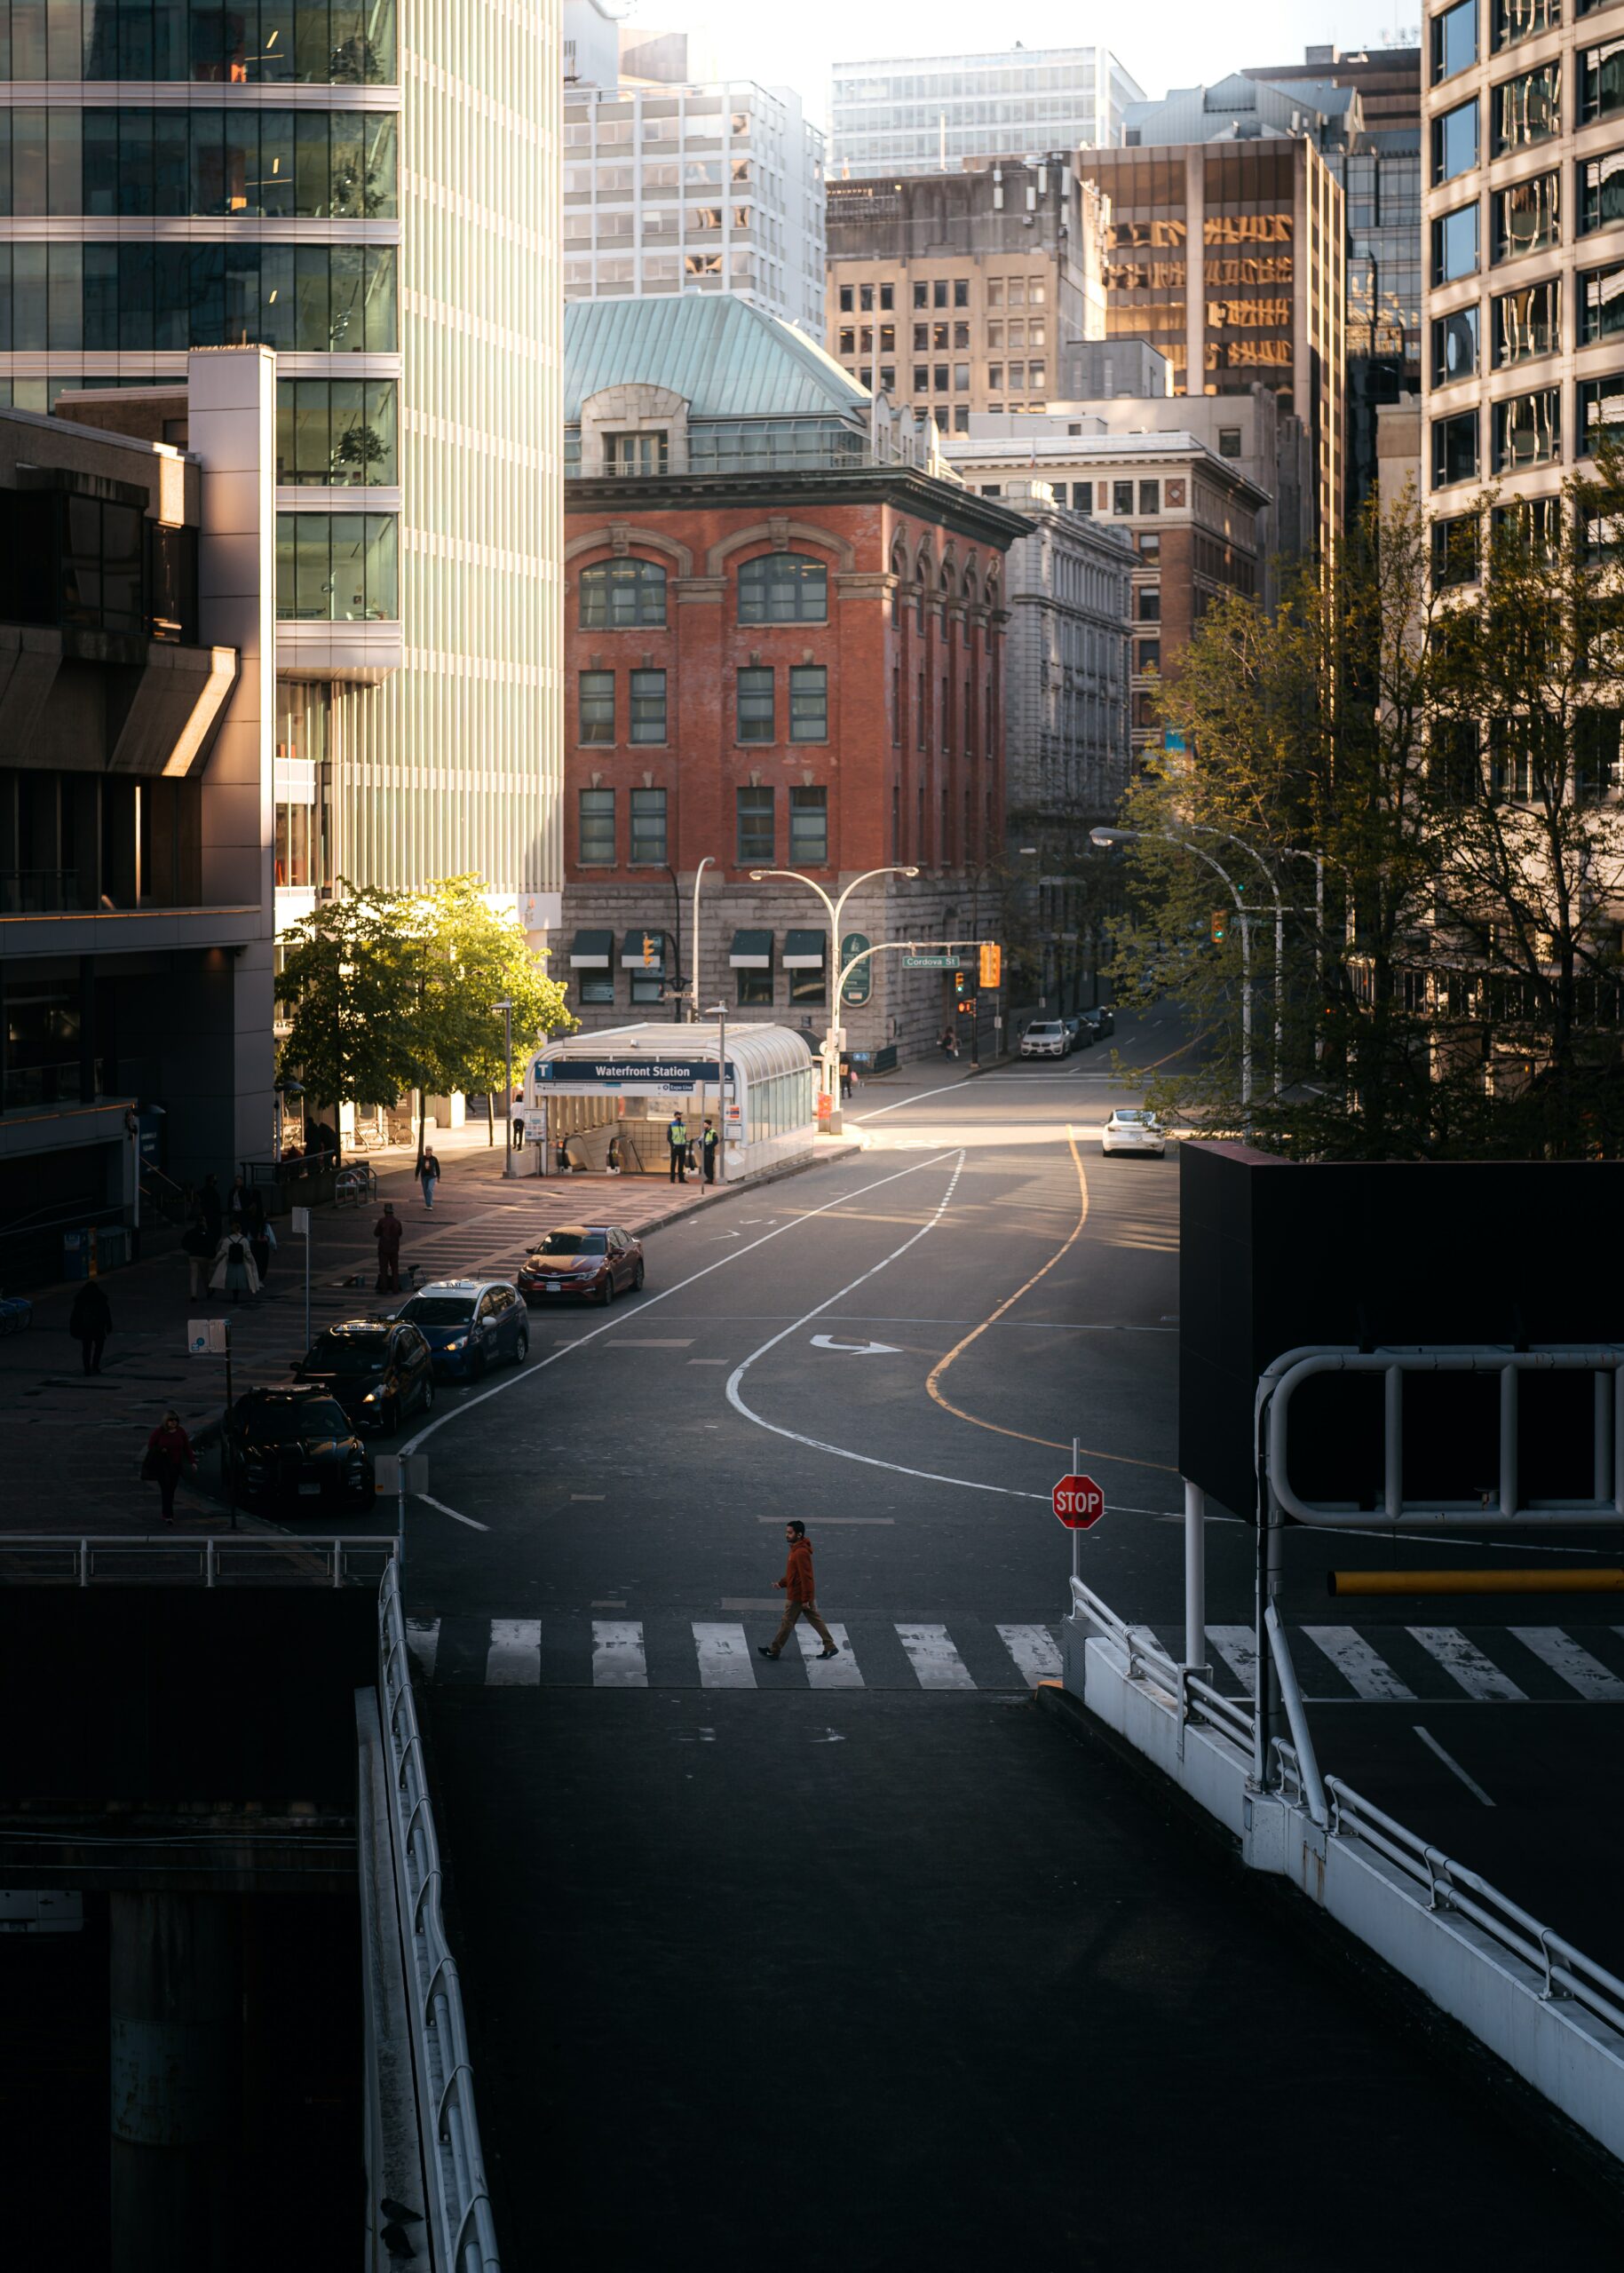 The photo is of the streets of Vancouver. The street is empty except for one individual crossing the street.